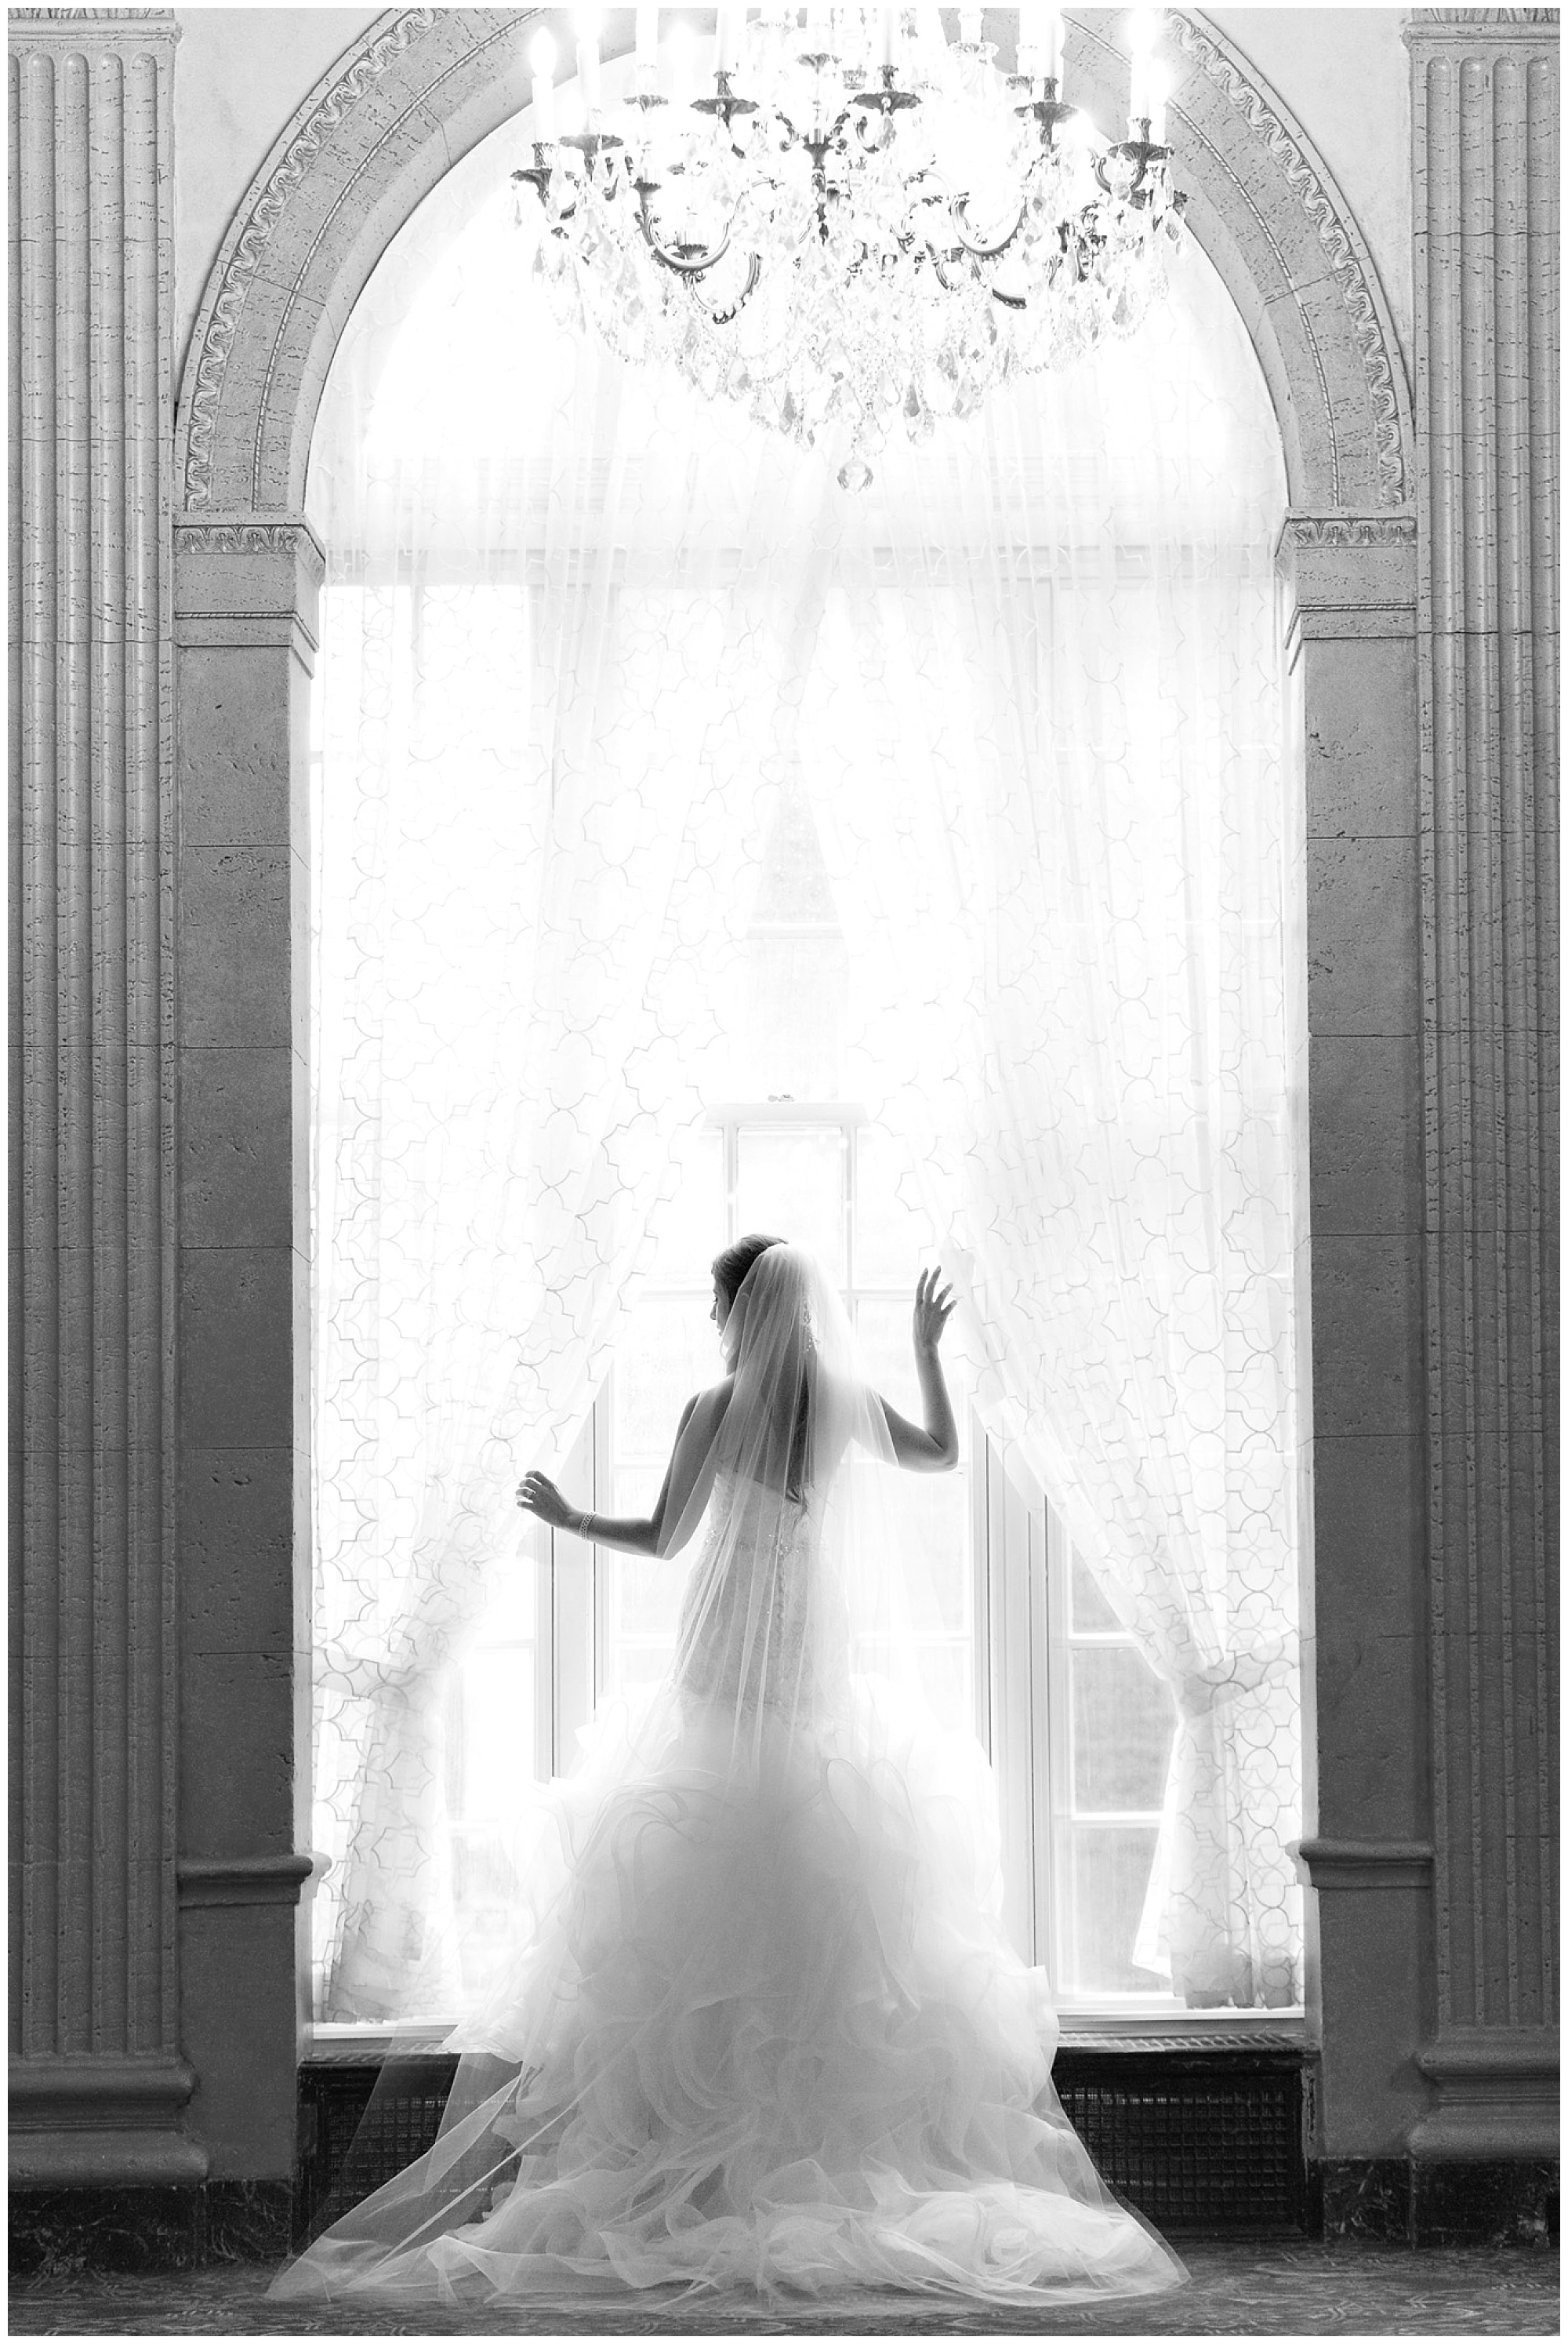 A portrait of a bride semi silhouetted and framed by a large arched window.